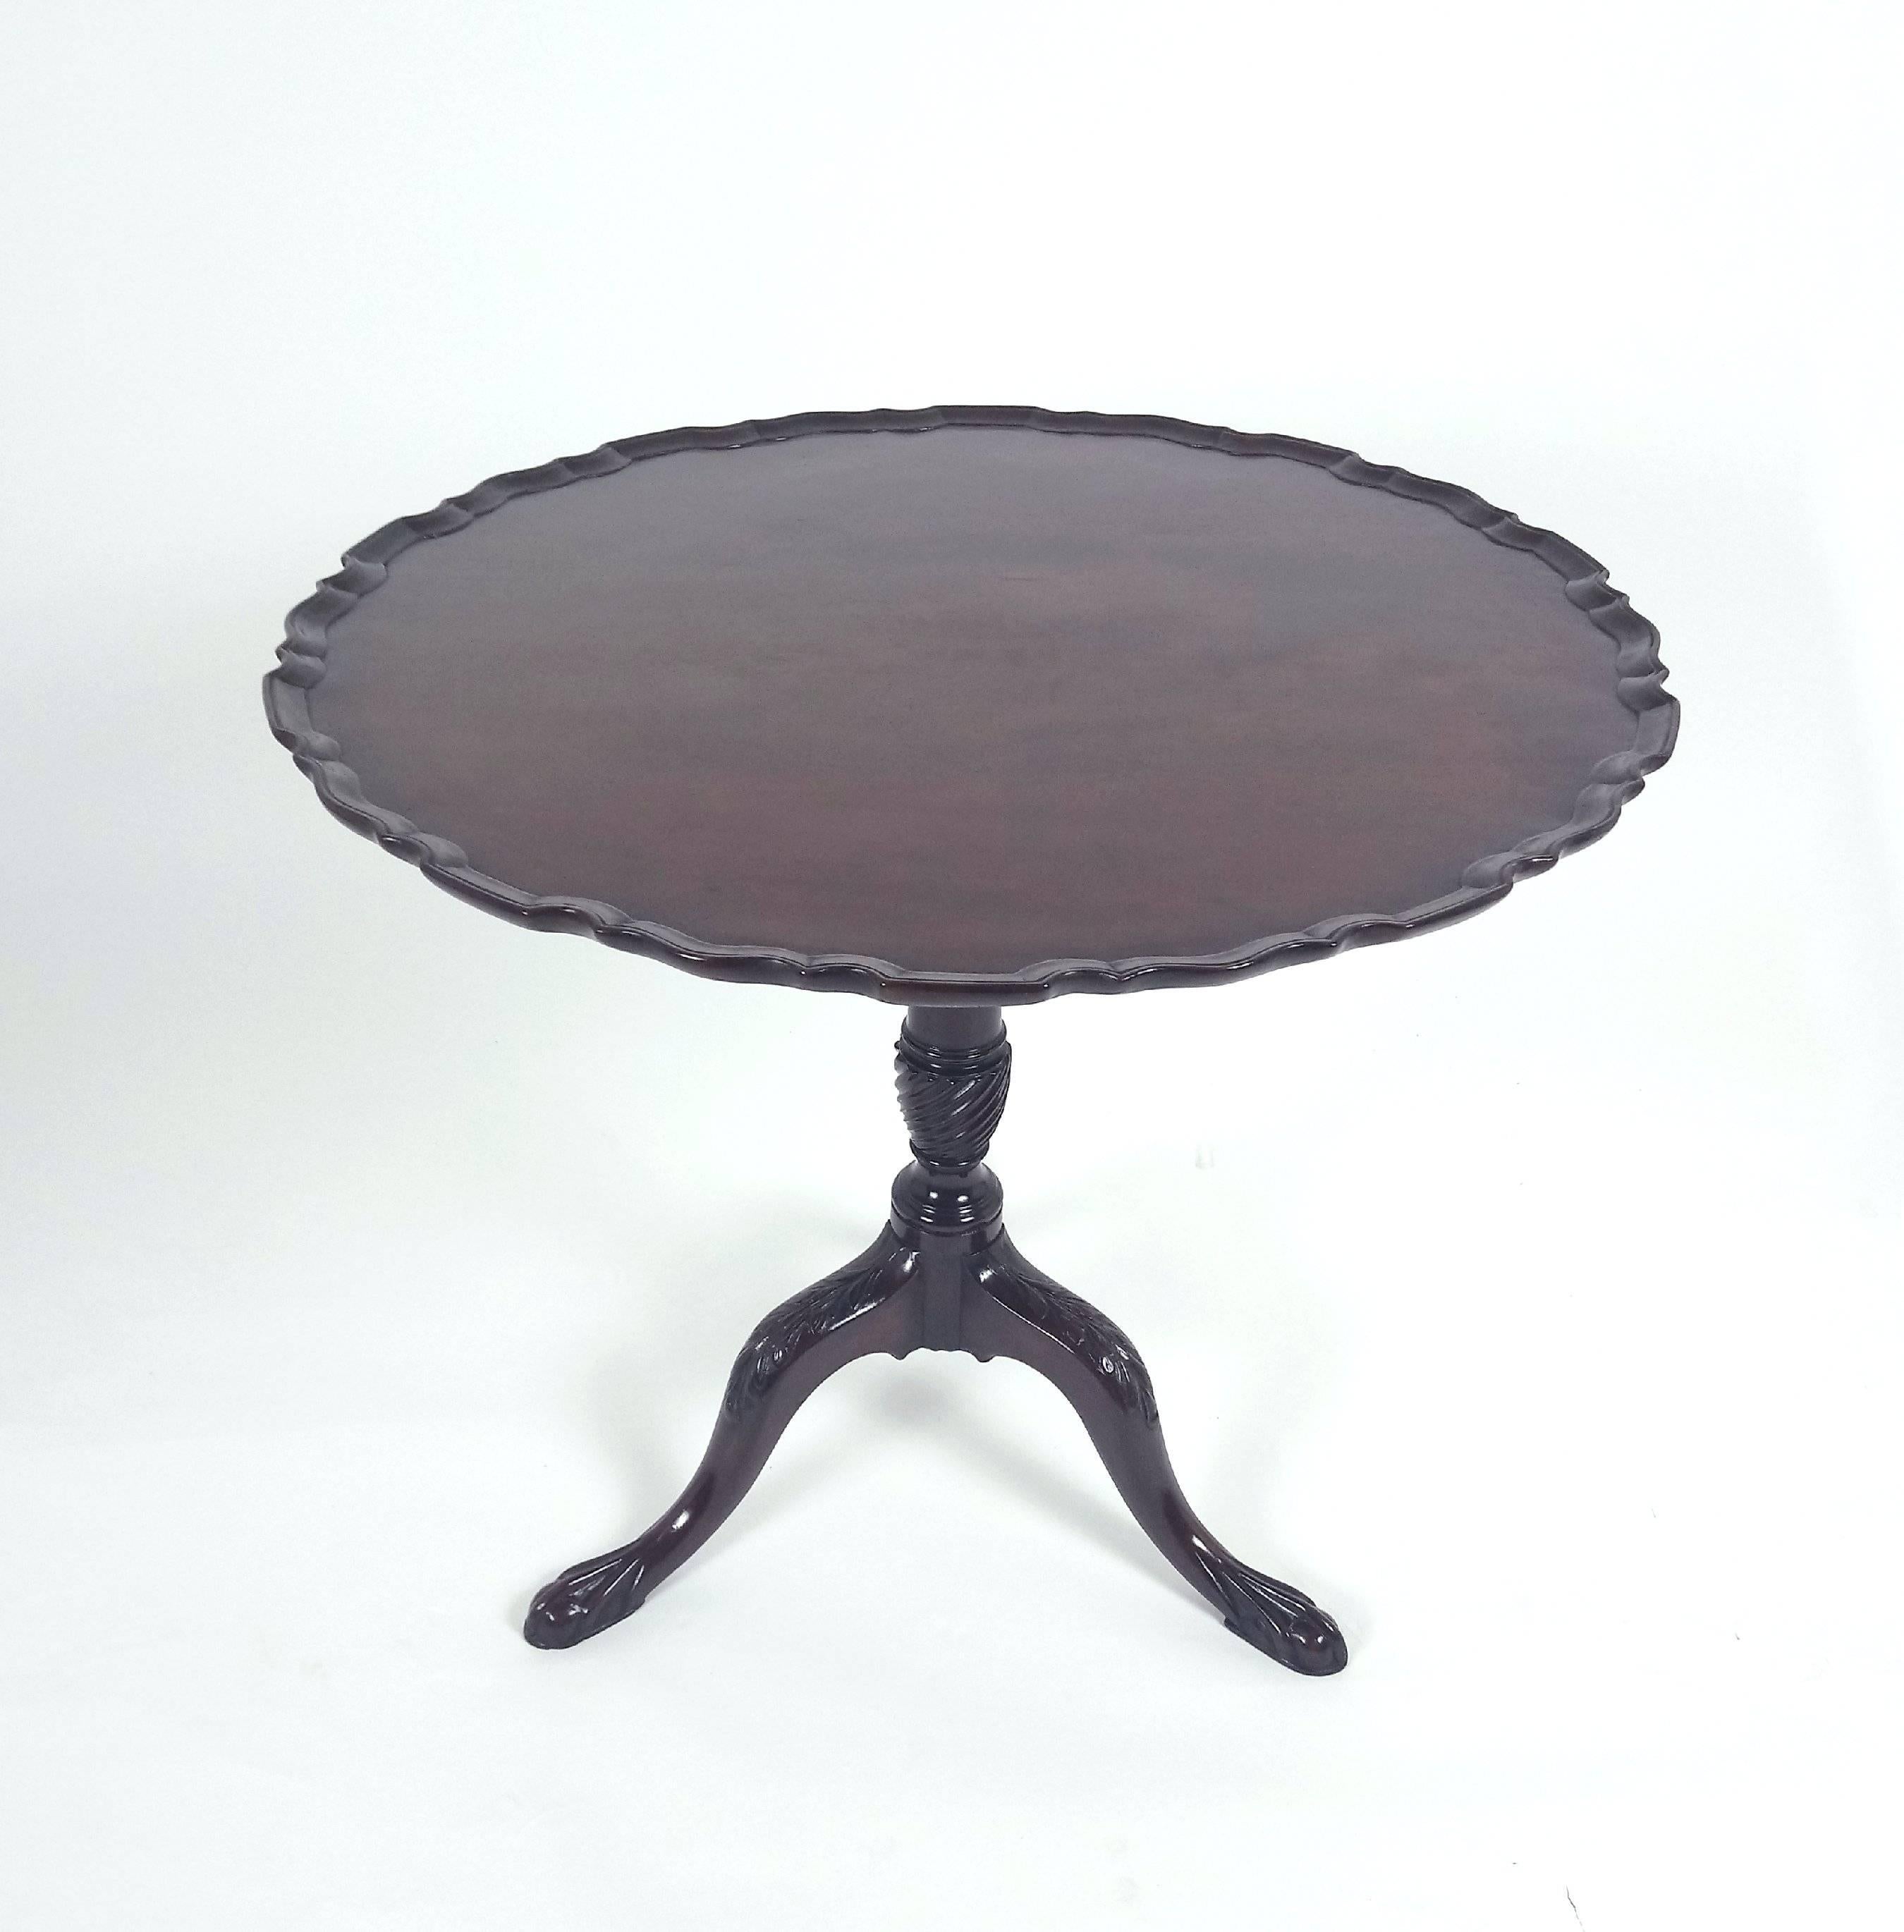 British 18th Century Mahogany Tilt-Top Tripod Table with Carved Pie Crust Edge